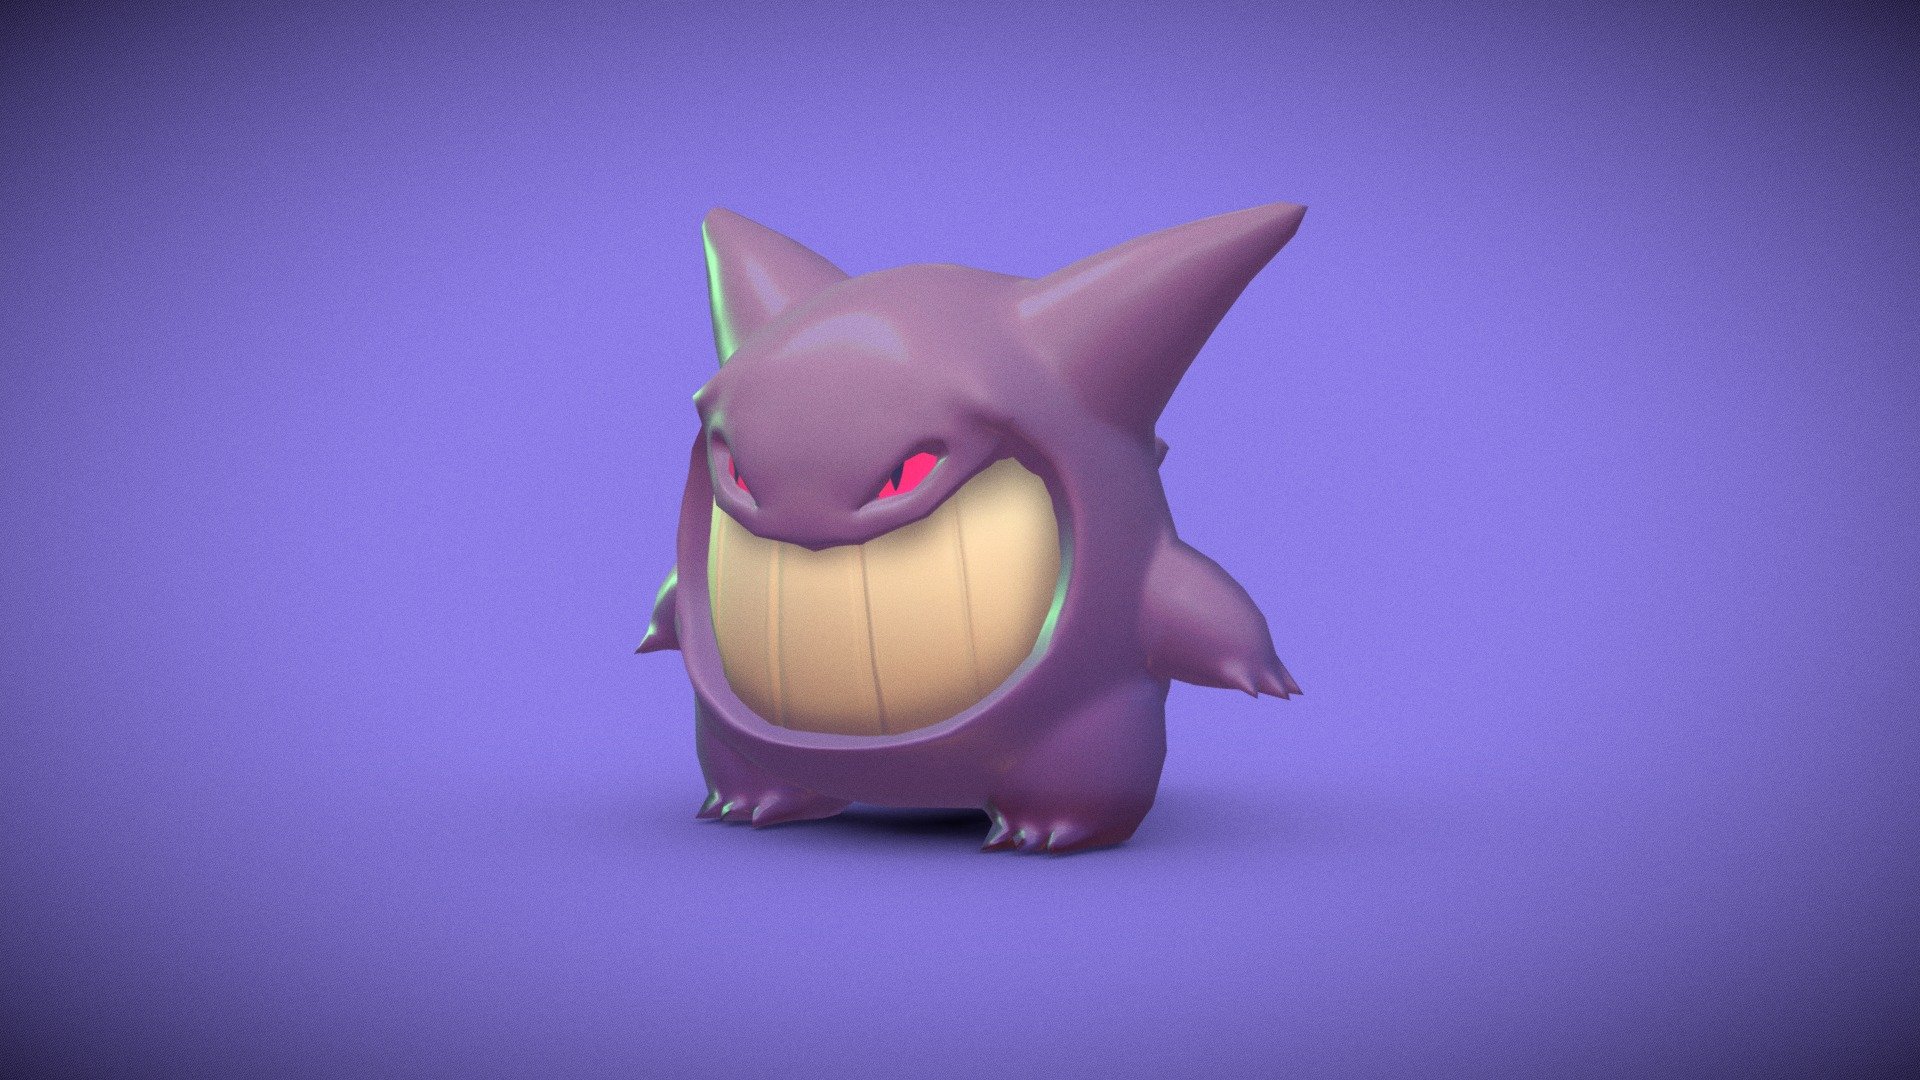 Halloween is upon us and I was in the mood to make this lovely little gremlin. Gengar is one of my favourite pokémon and I wanted to capture its creepy and sneeky nature. Had a lot of fun with this one! - Smiling Gengar - 3D model by Andreas Gunnman (@Discoflame) 3d model